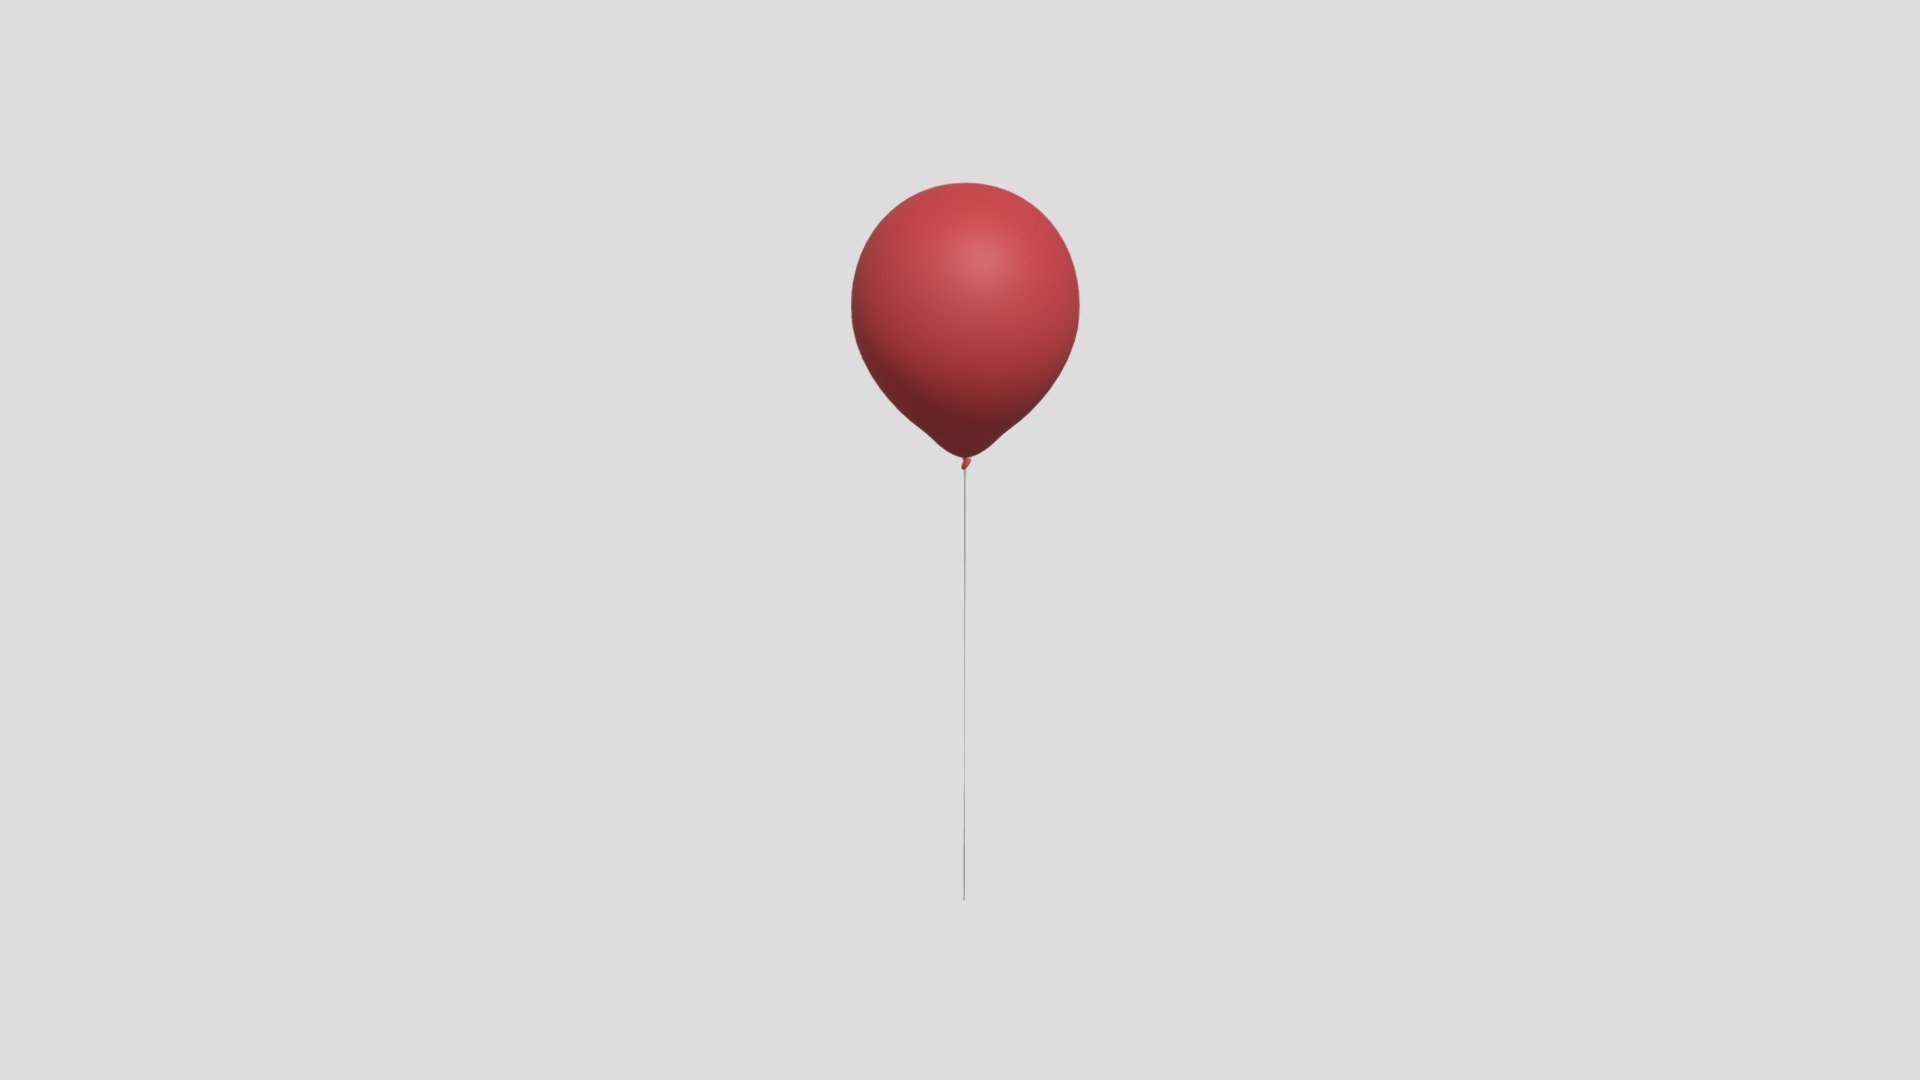 Subdivision Level: 2

Non-Mirrored.

Textures: 64 x 64, Two colors on texture.

Materials: 2 - Balloon, Rope.

Formats: .stl .obj .fbx .dae

Rigged (See in the picture)

Origin located on bottom-rope-center (See the picture screenshot)

Polygons: 28412

Vertices: 14210

I hope you enjoy the model! - Balloon - Buy Royalty Free 3D model by Ed+ (@EDplus) 3d model